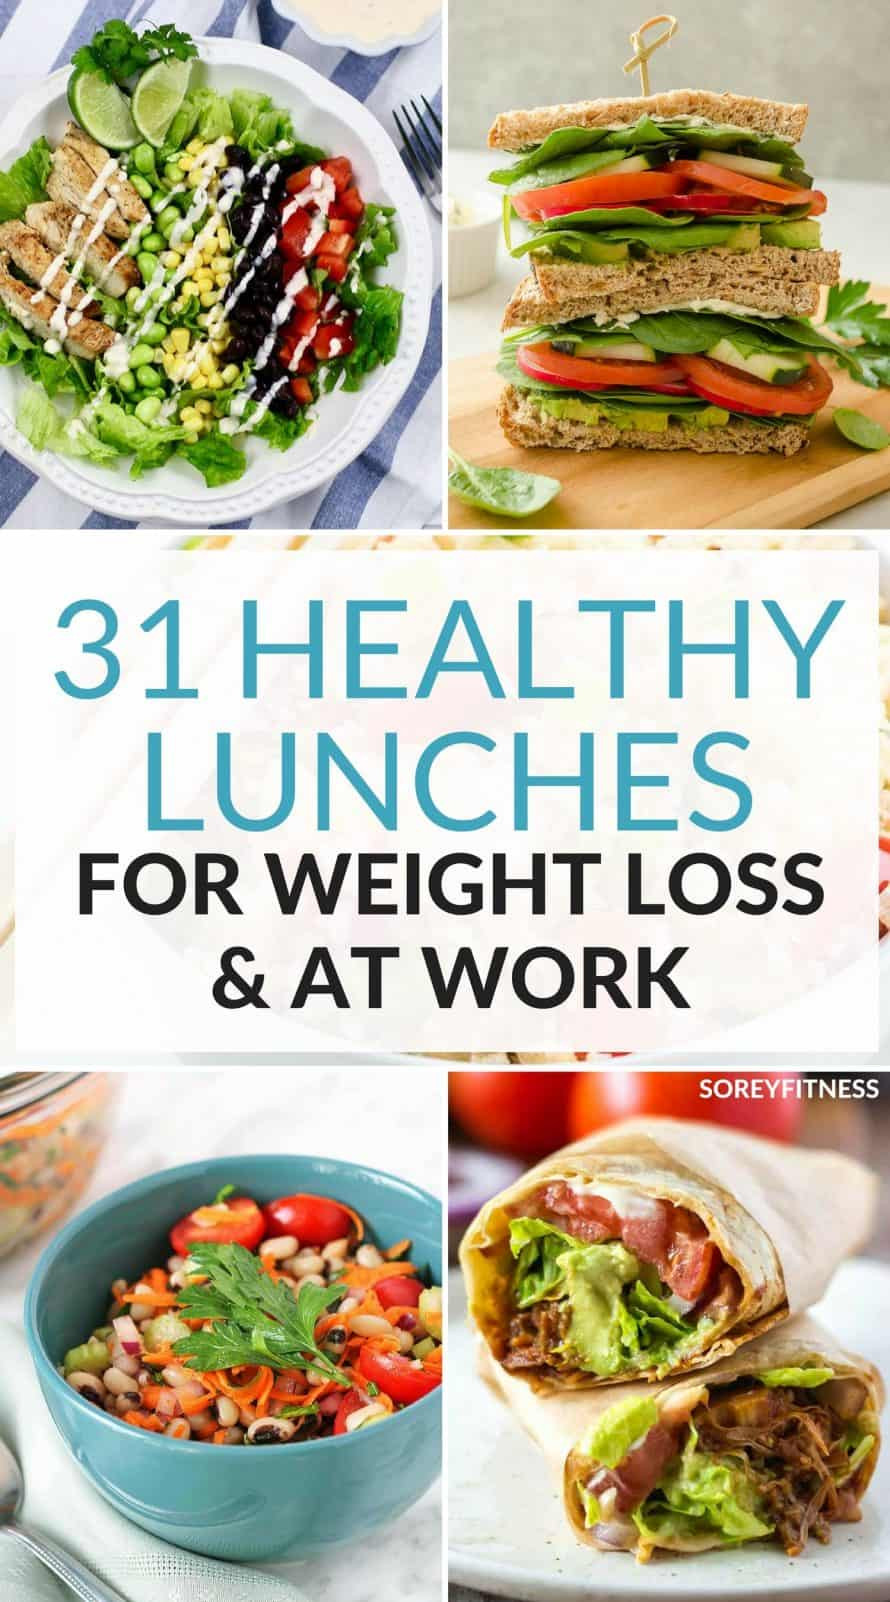 Healthy Sandwich Recipes For Weight Loss
 31 Healthy Lunch Ideas For Weight Loss Easy Meals for